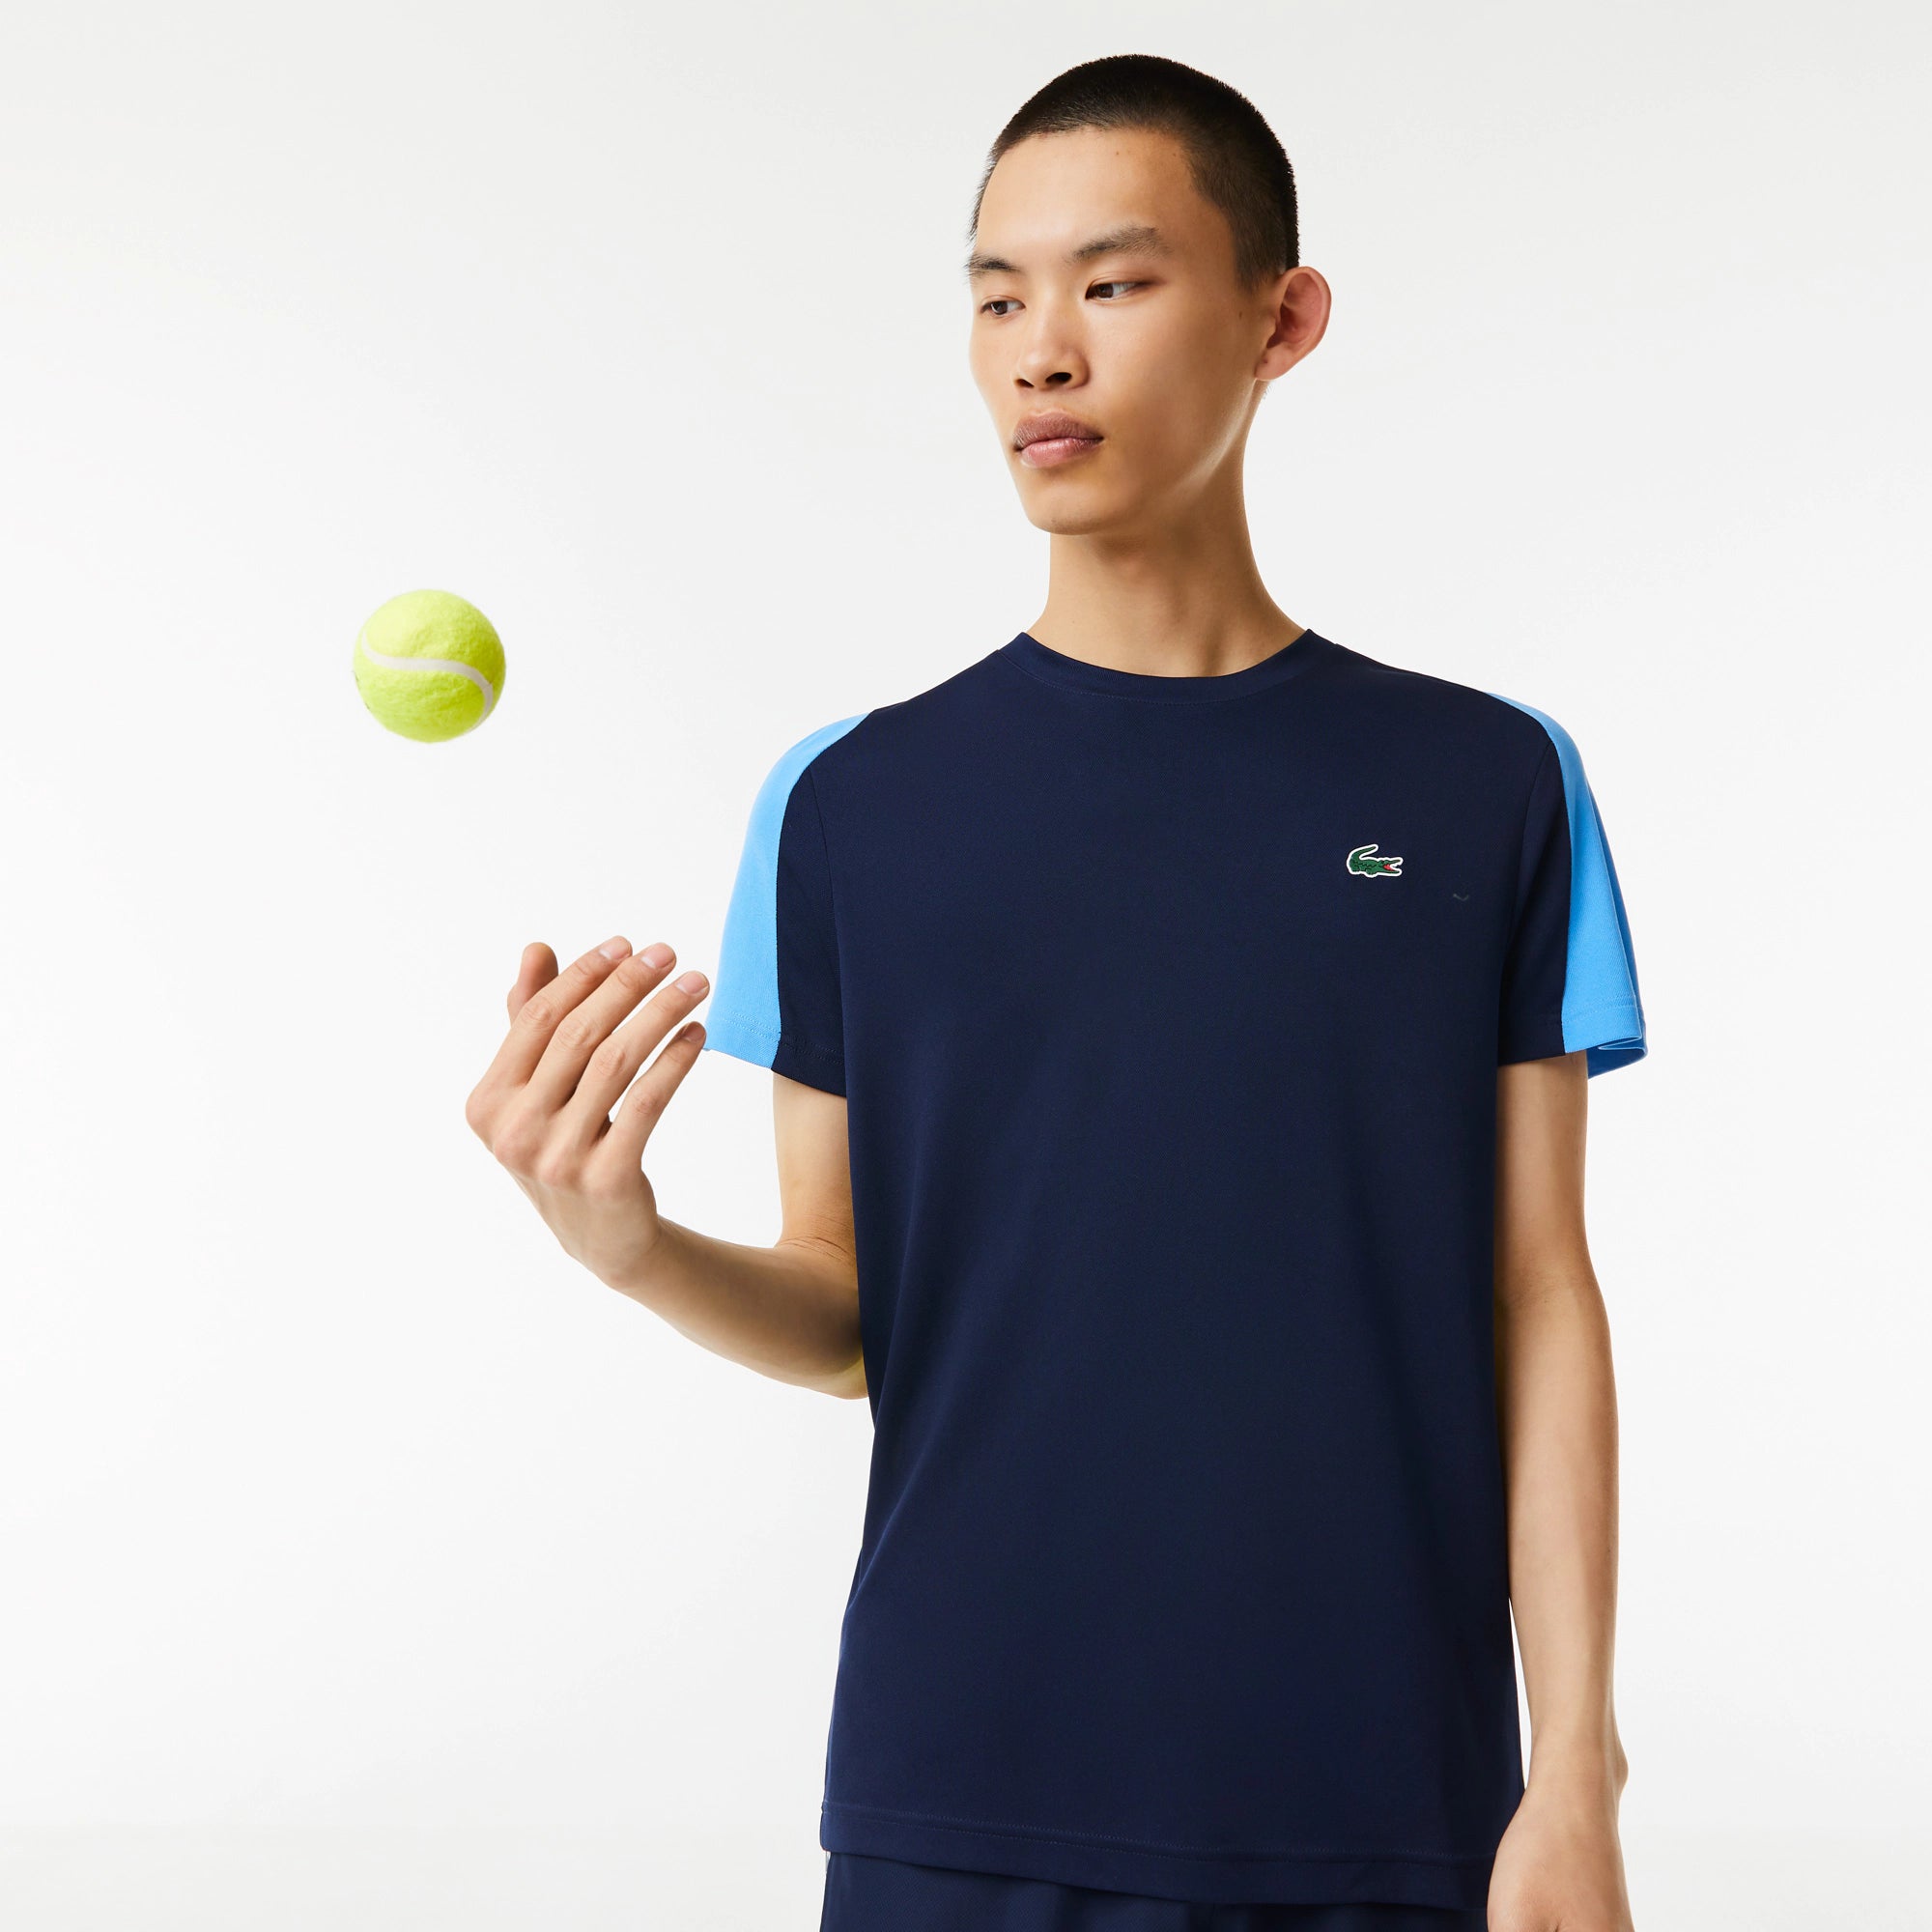 Lacoste Technical Poly T-Shirt